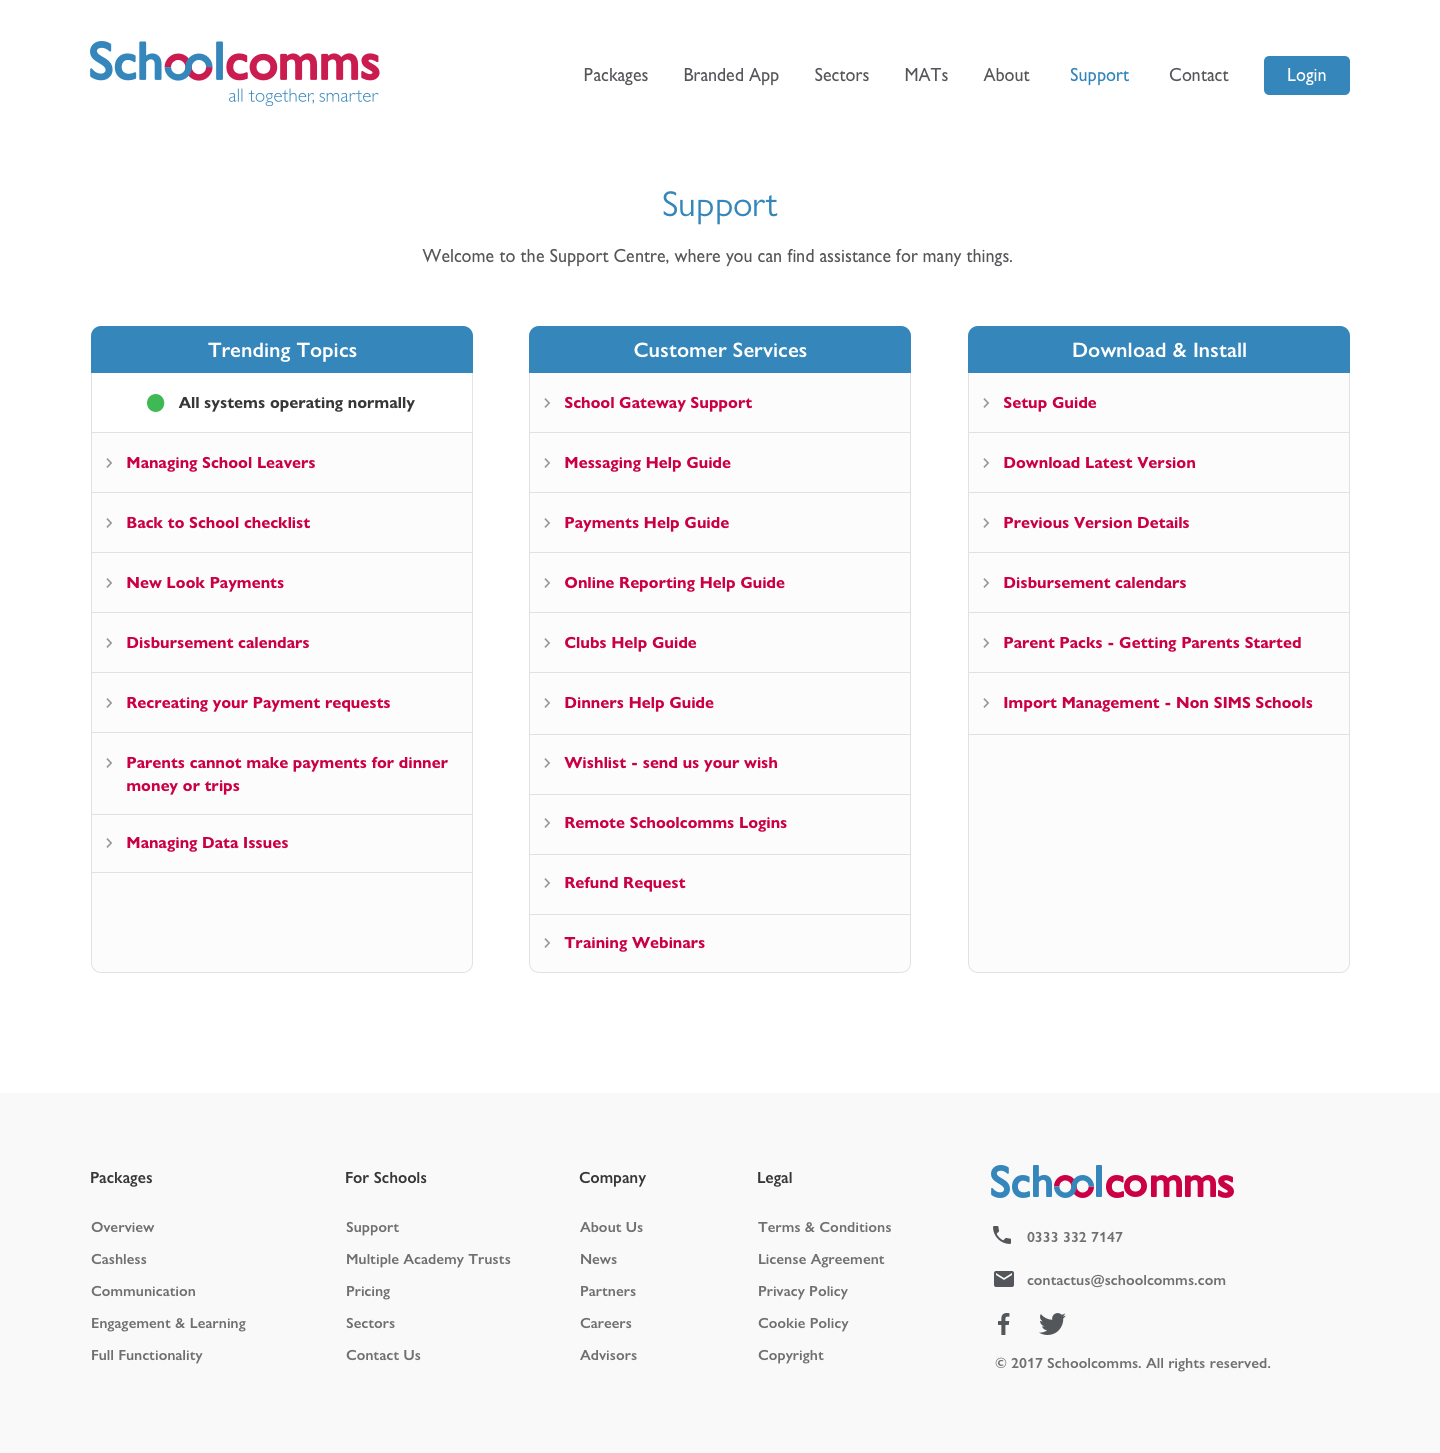 Schoolcomms support page design